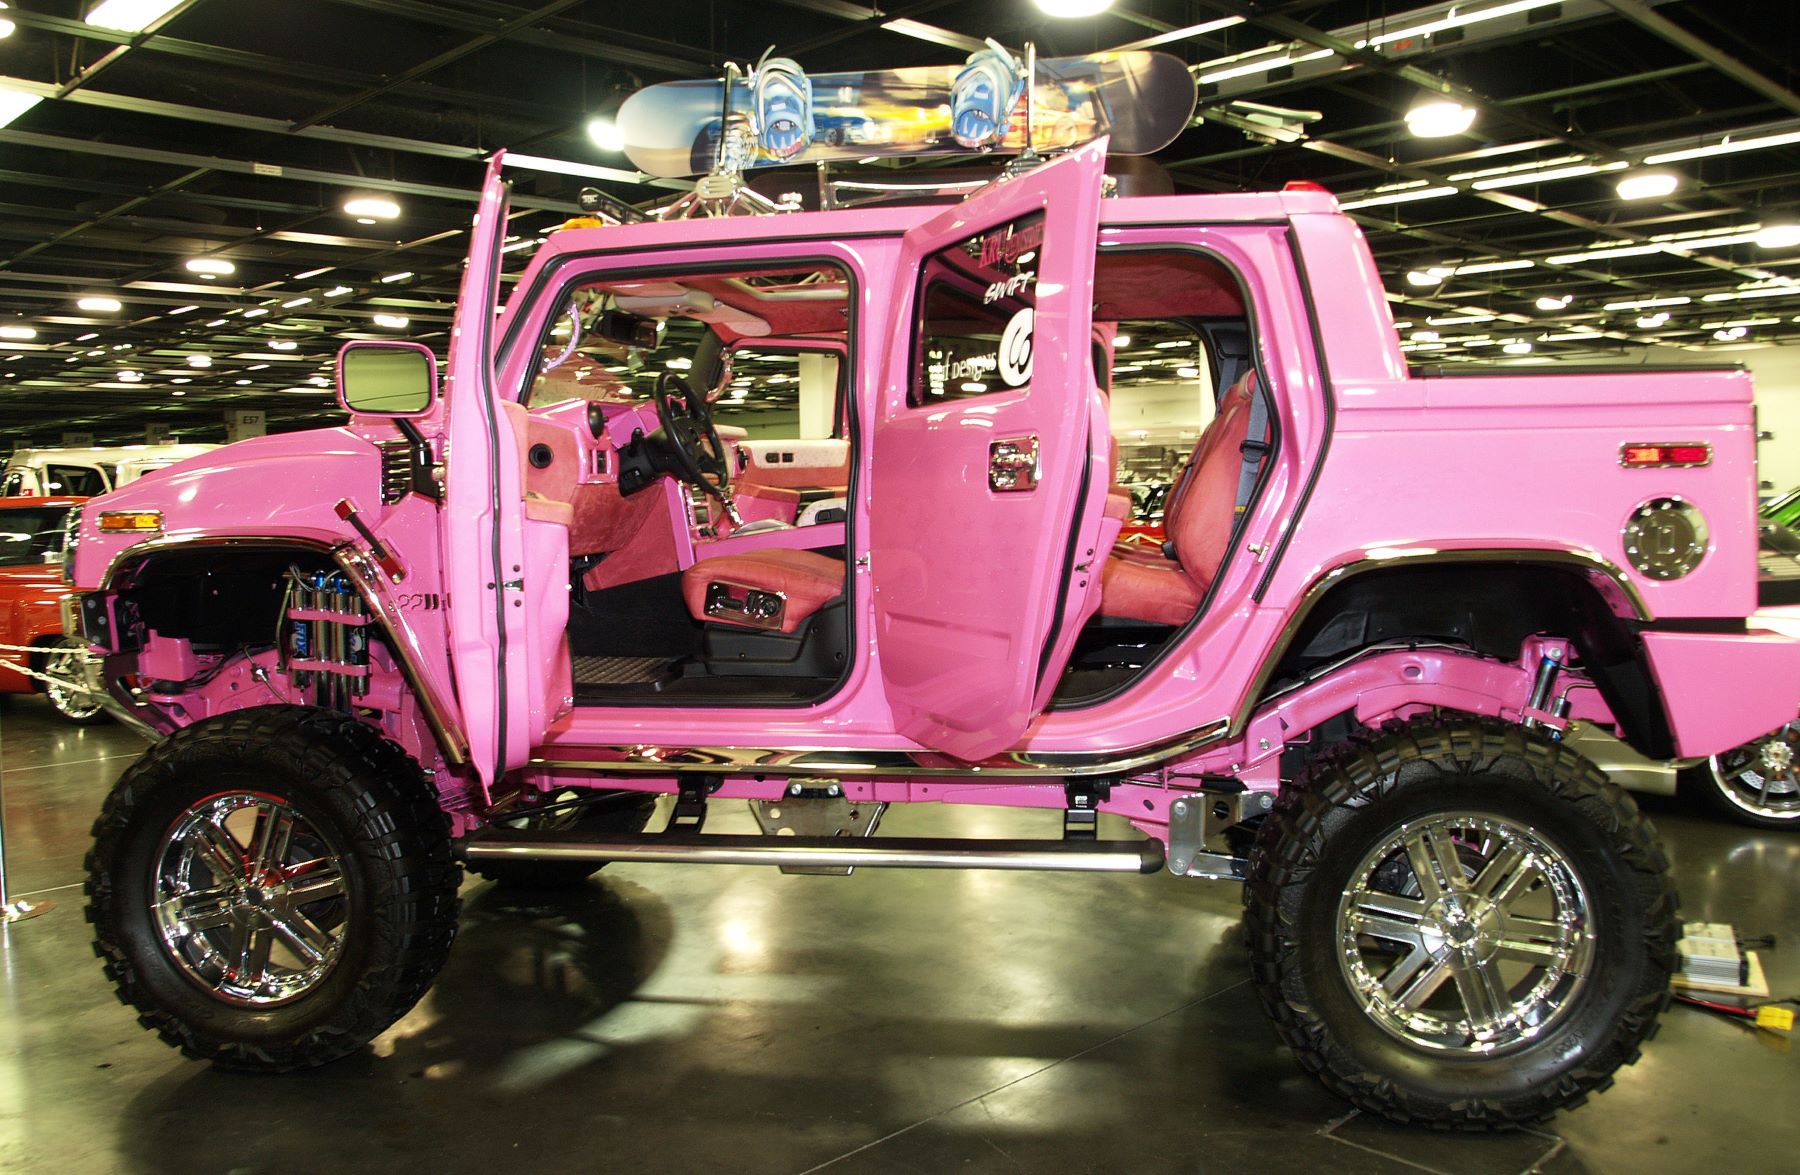 Britney Spears' pink Hummer H2 used for the 'Do Somethin' music video